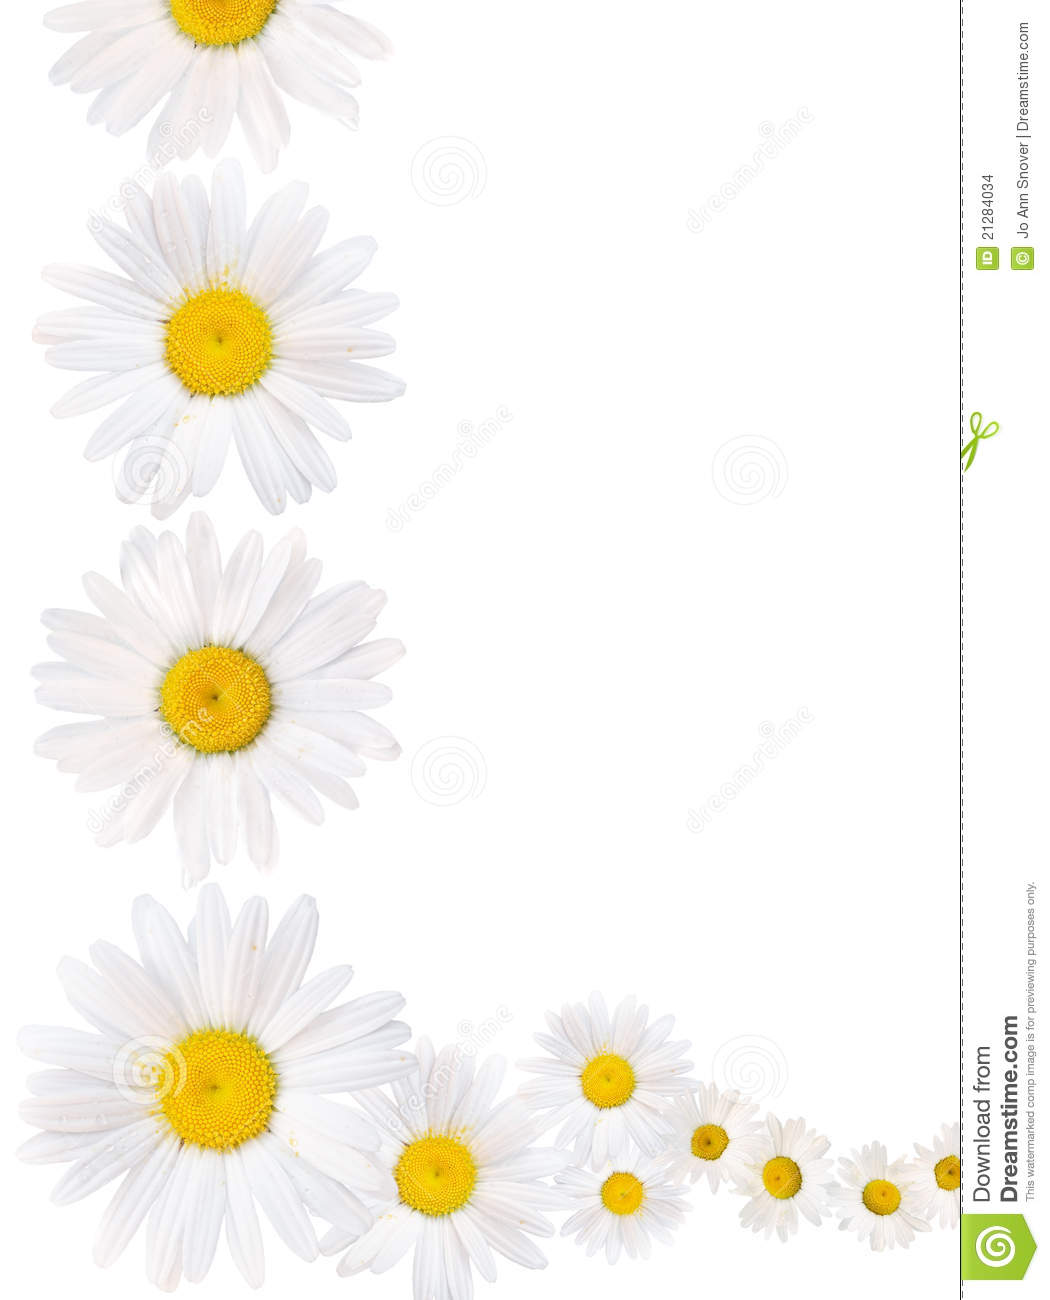 Daisy Chain Border Stock Images   Image  21284034